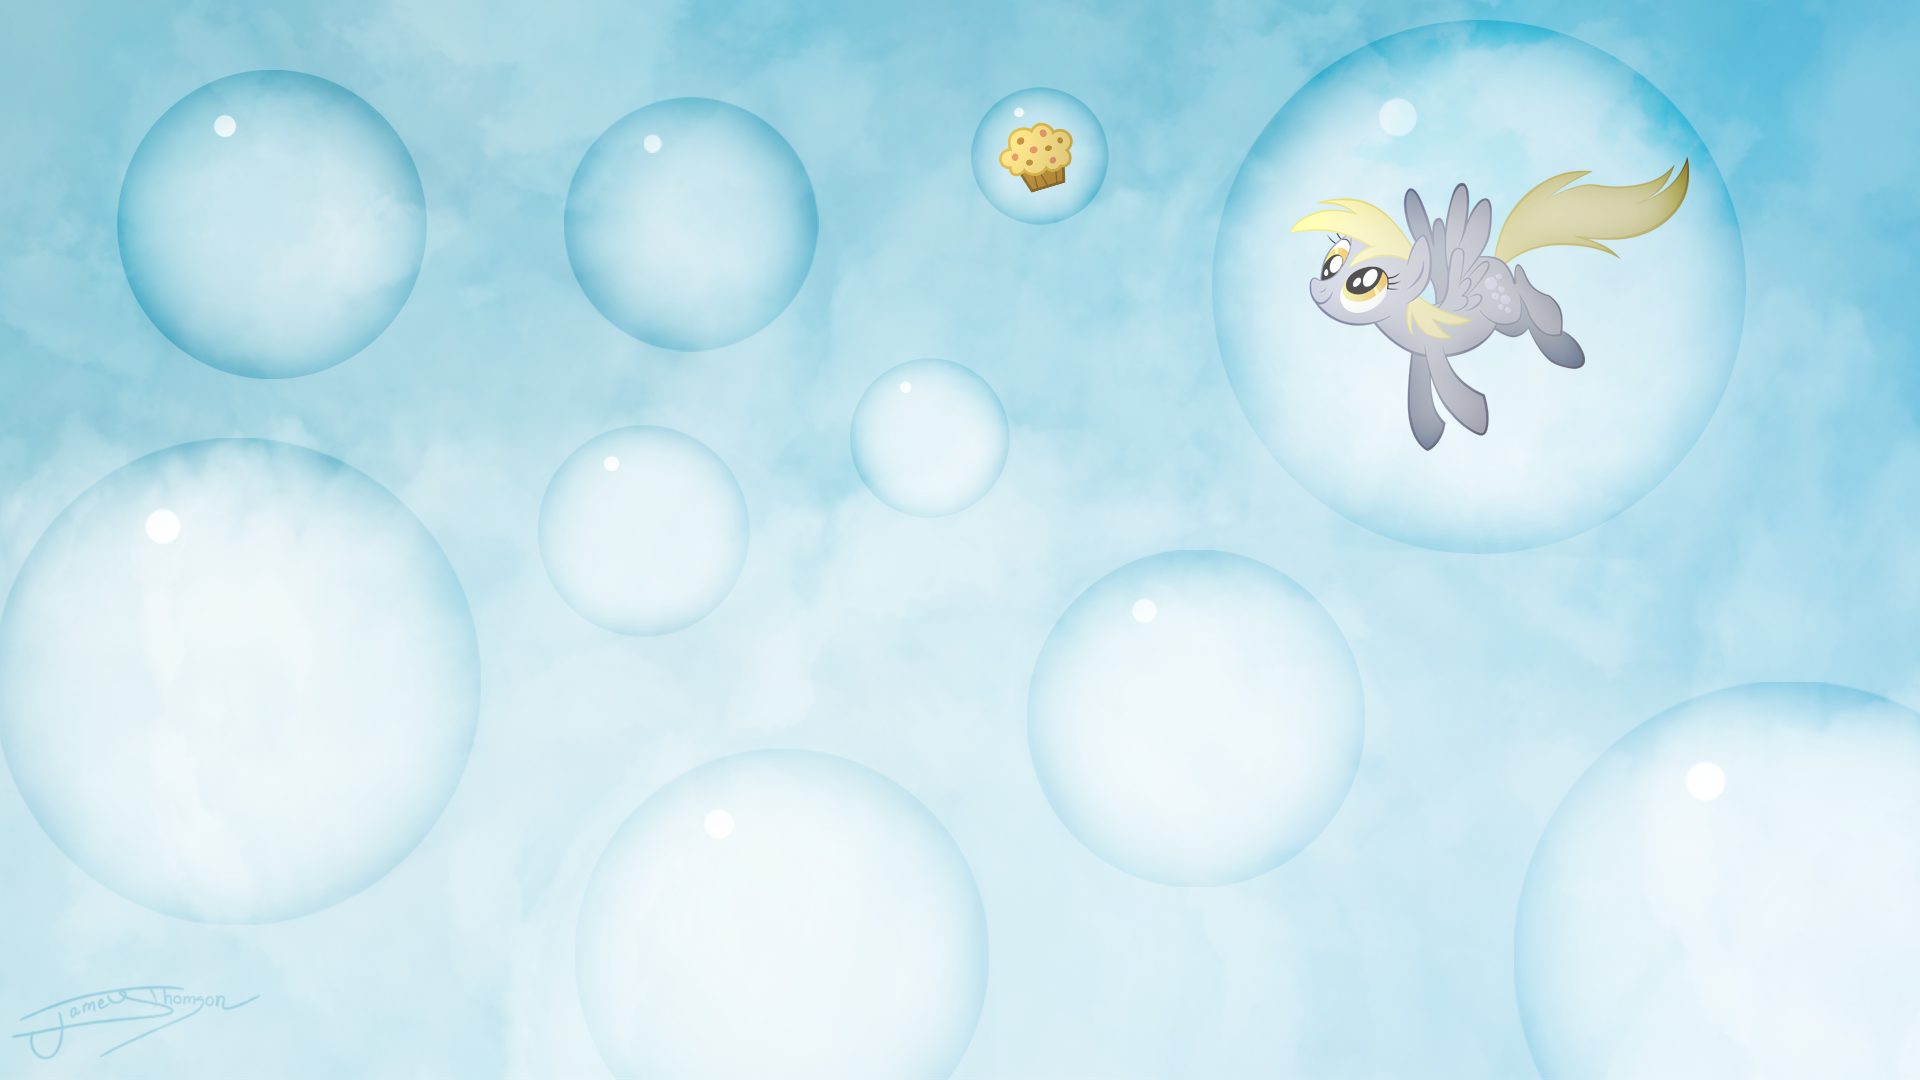 Derpy Hooves - Bubbles by Jamey4, Stormius and ZuTheSkunk